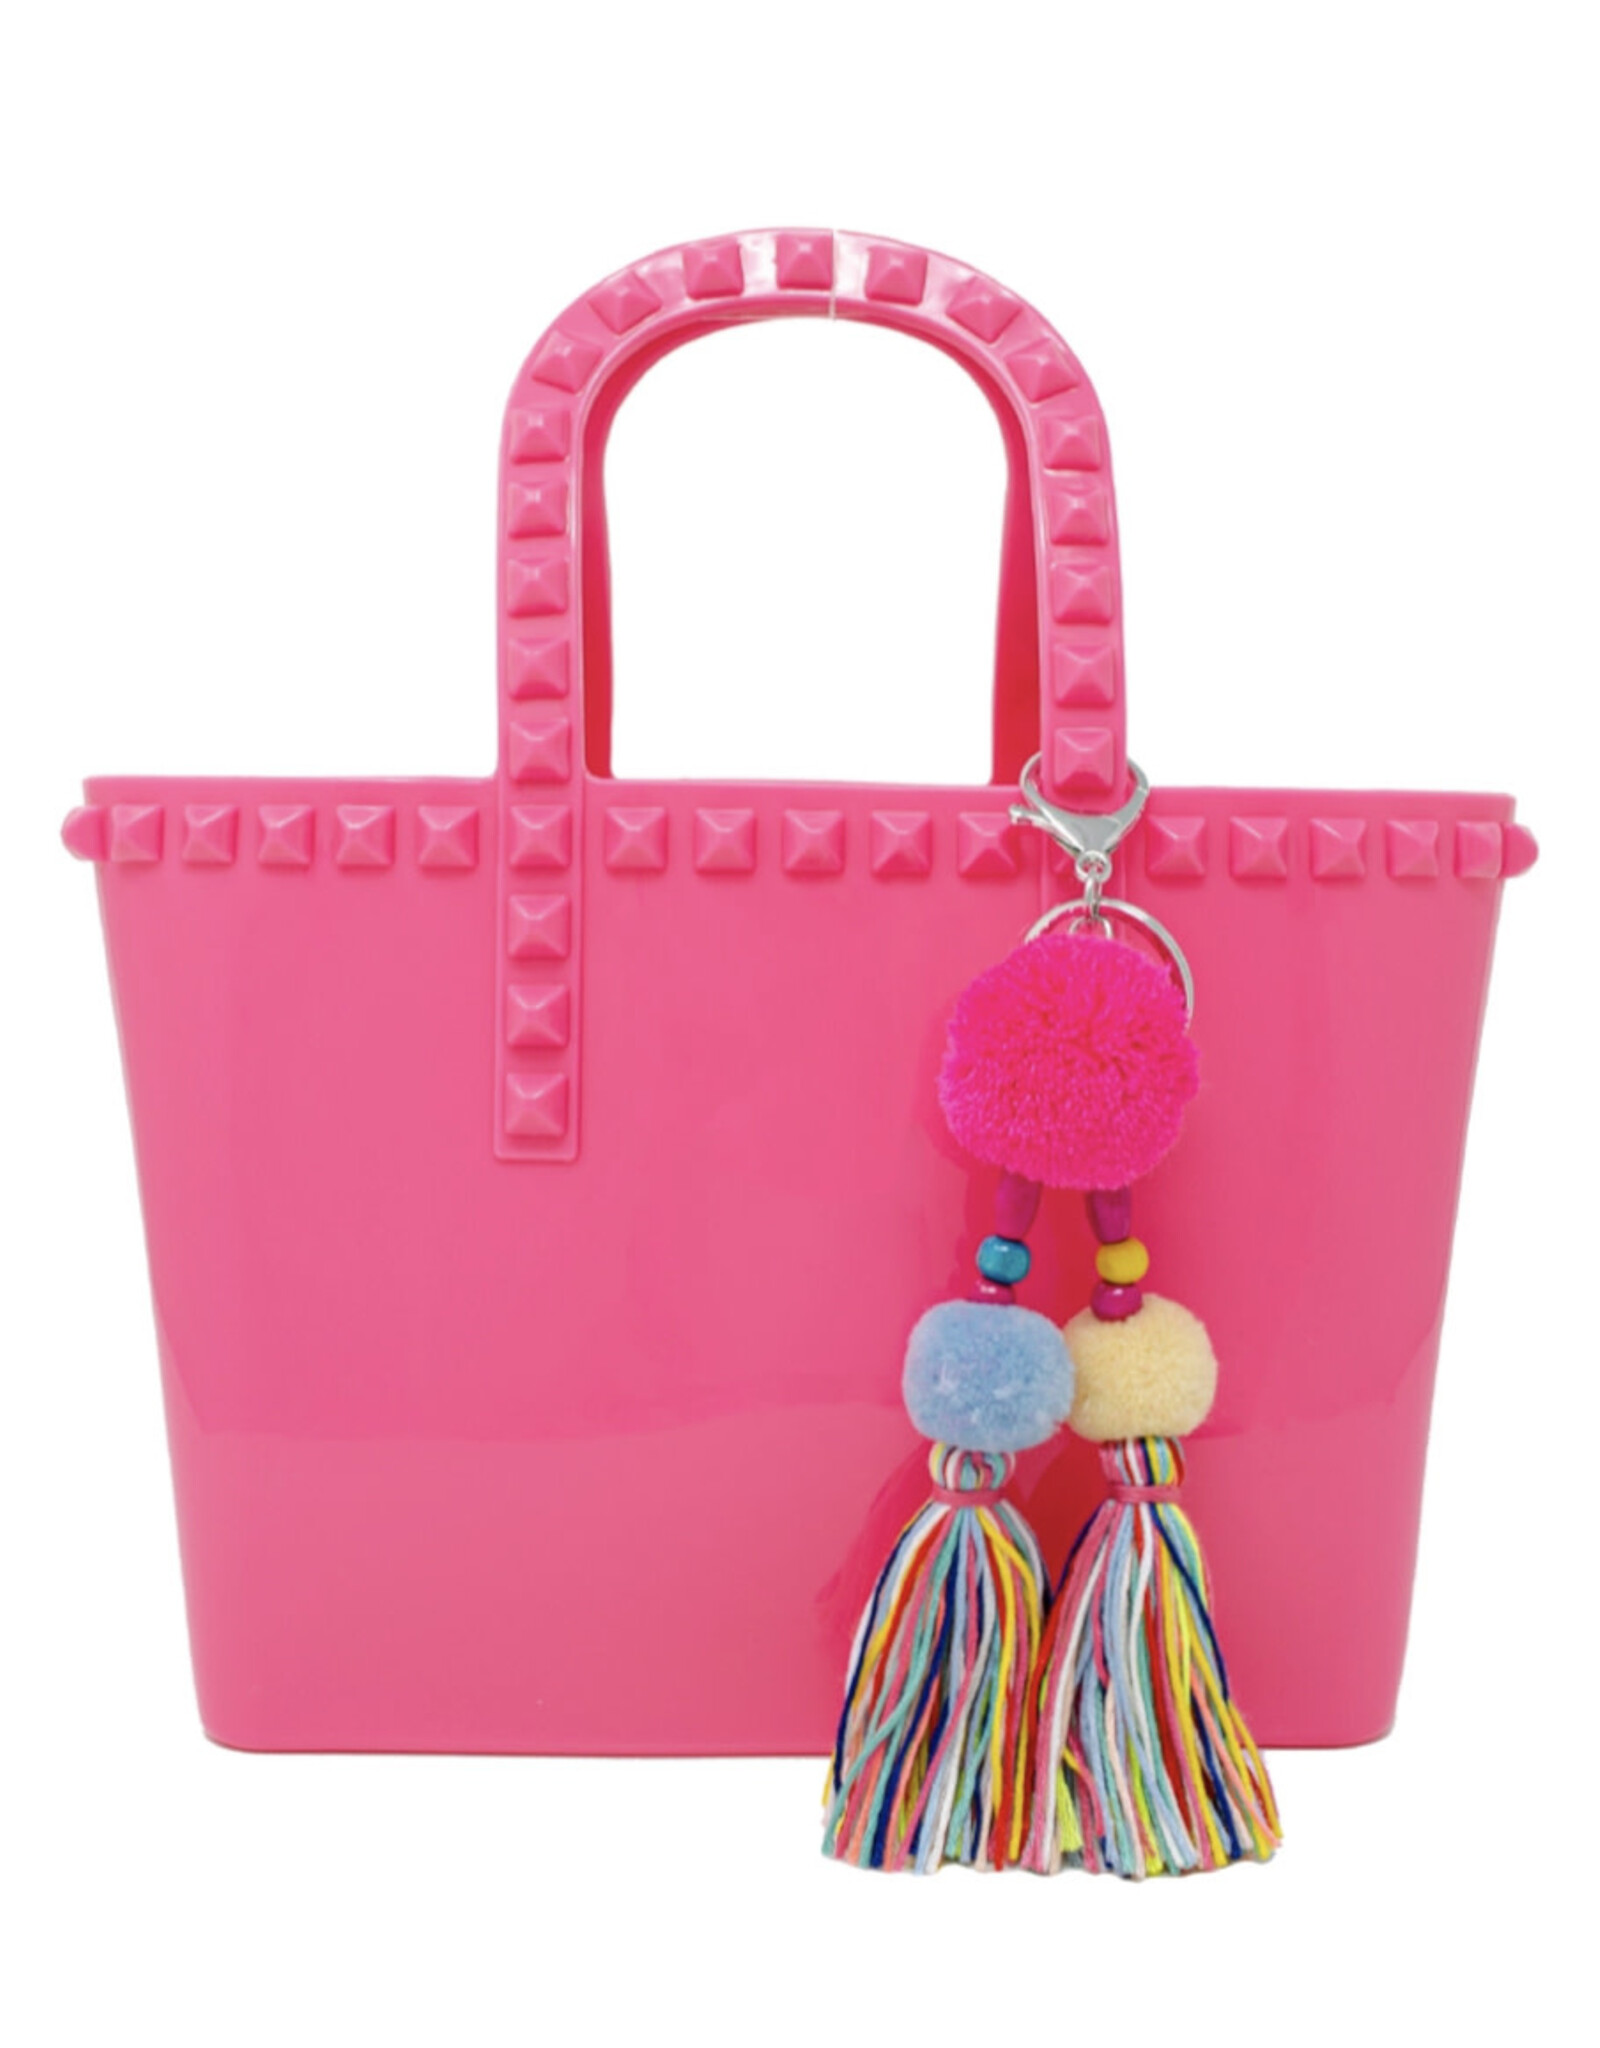 Zomi Gems Tiny Jelly Tote bag in Hot Pink